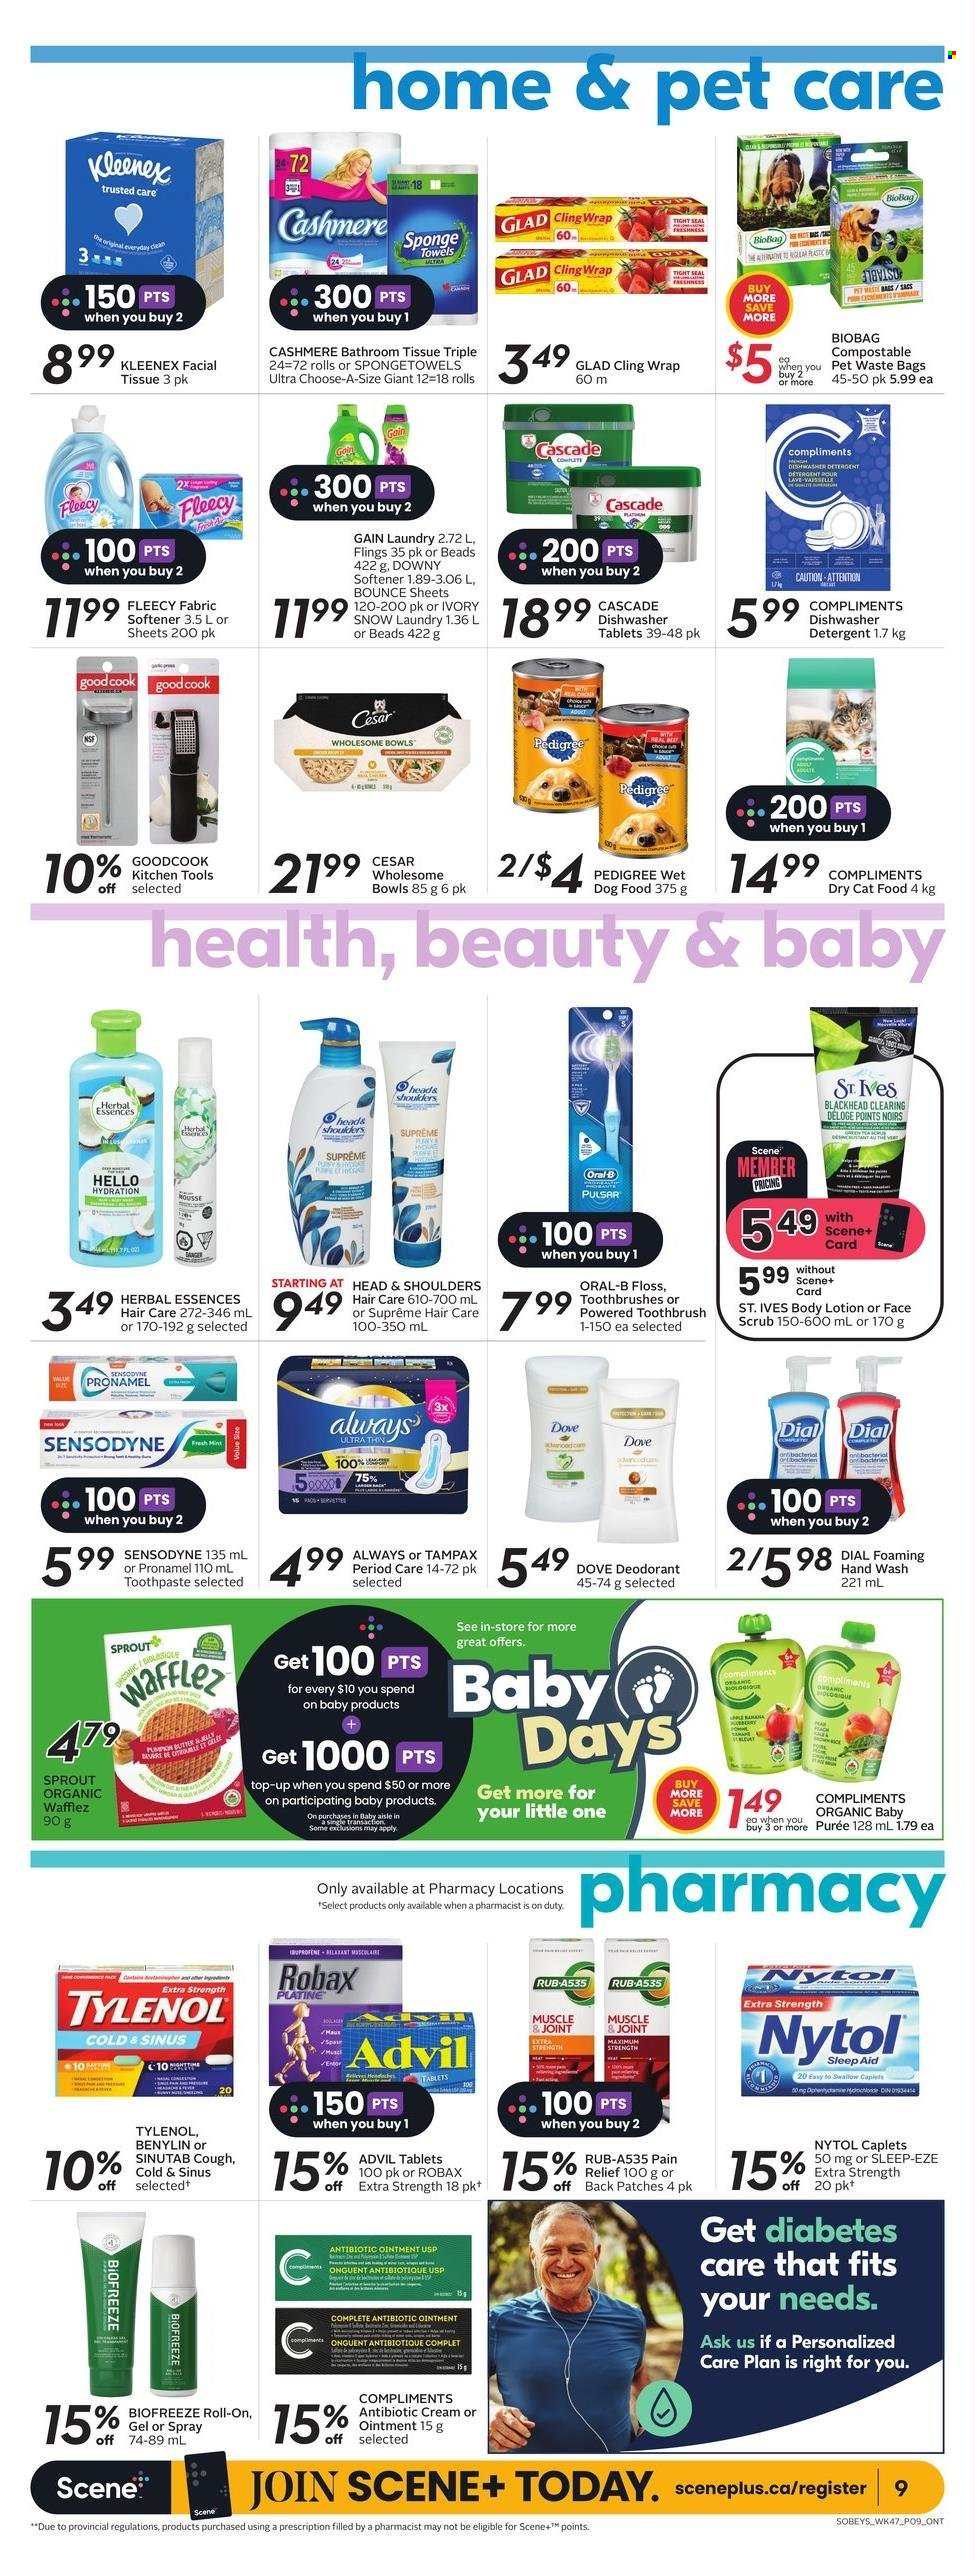 thumbnail - Sobeys Flyer - March 23, 2023 - March 29, 2023 - Sales products - Dove, ointment, bath tissue, Kleenex, Gain, fabric softener, Bounce, Cascade, Downy Laundry, dishwasher cleaner, dishwasher tablets, hand wash, Dial, toothbrush, toothpaste, Always pads, Head & Shoulders, Herbal Essences, body lotion, anti-perspirant, roll-on, bag, trash bags, animal food, cat food, dog food, wet dog food, Pedigree, dry cat food, pain relief, magnesium, Tylenol, Advil Rapid, Benylin, detergent, Tampax, Oral-B, Sensodyne, deodorant. Page 19.